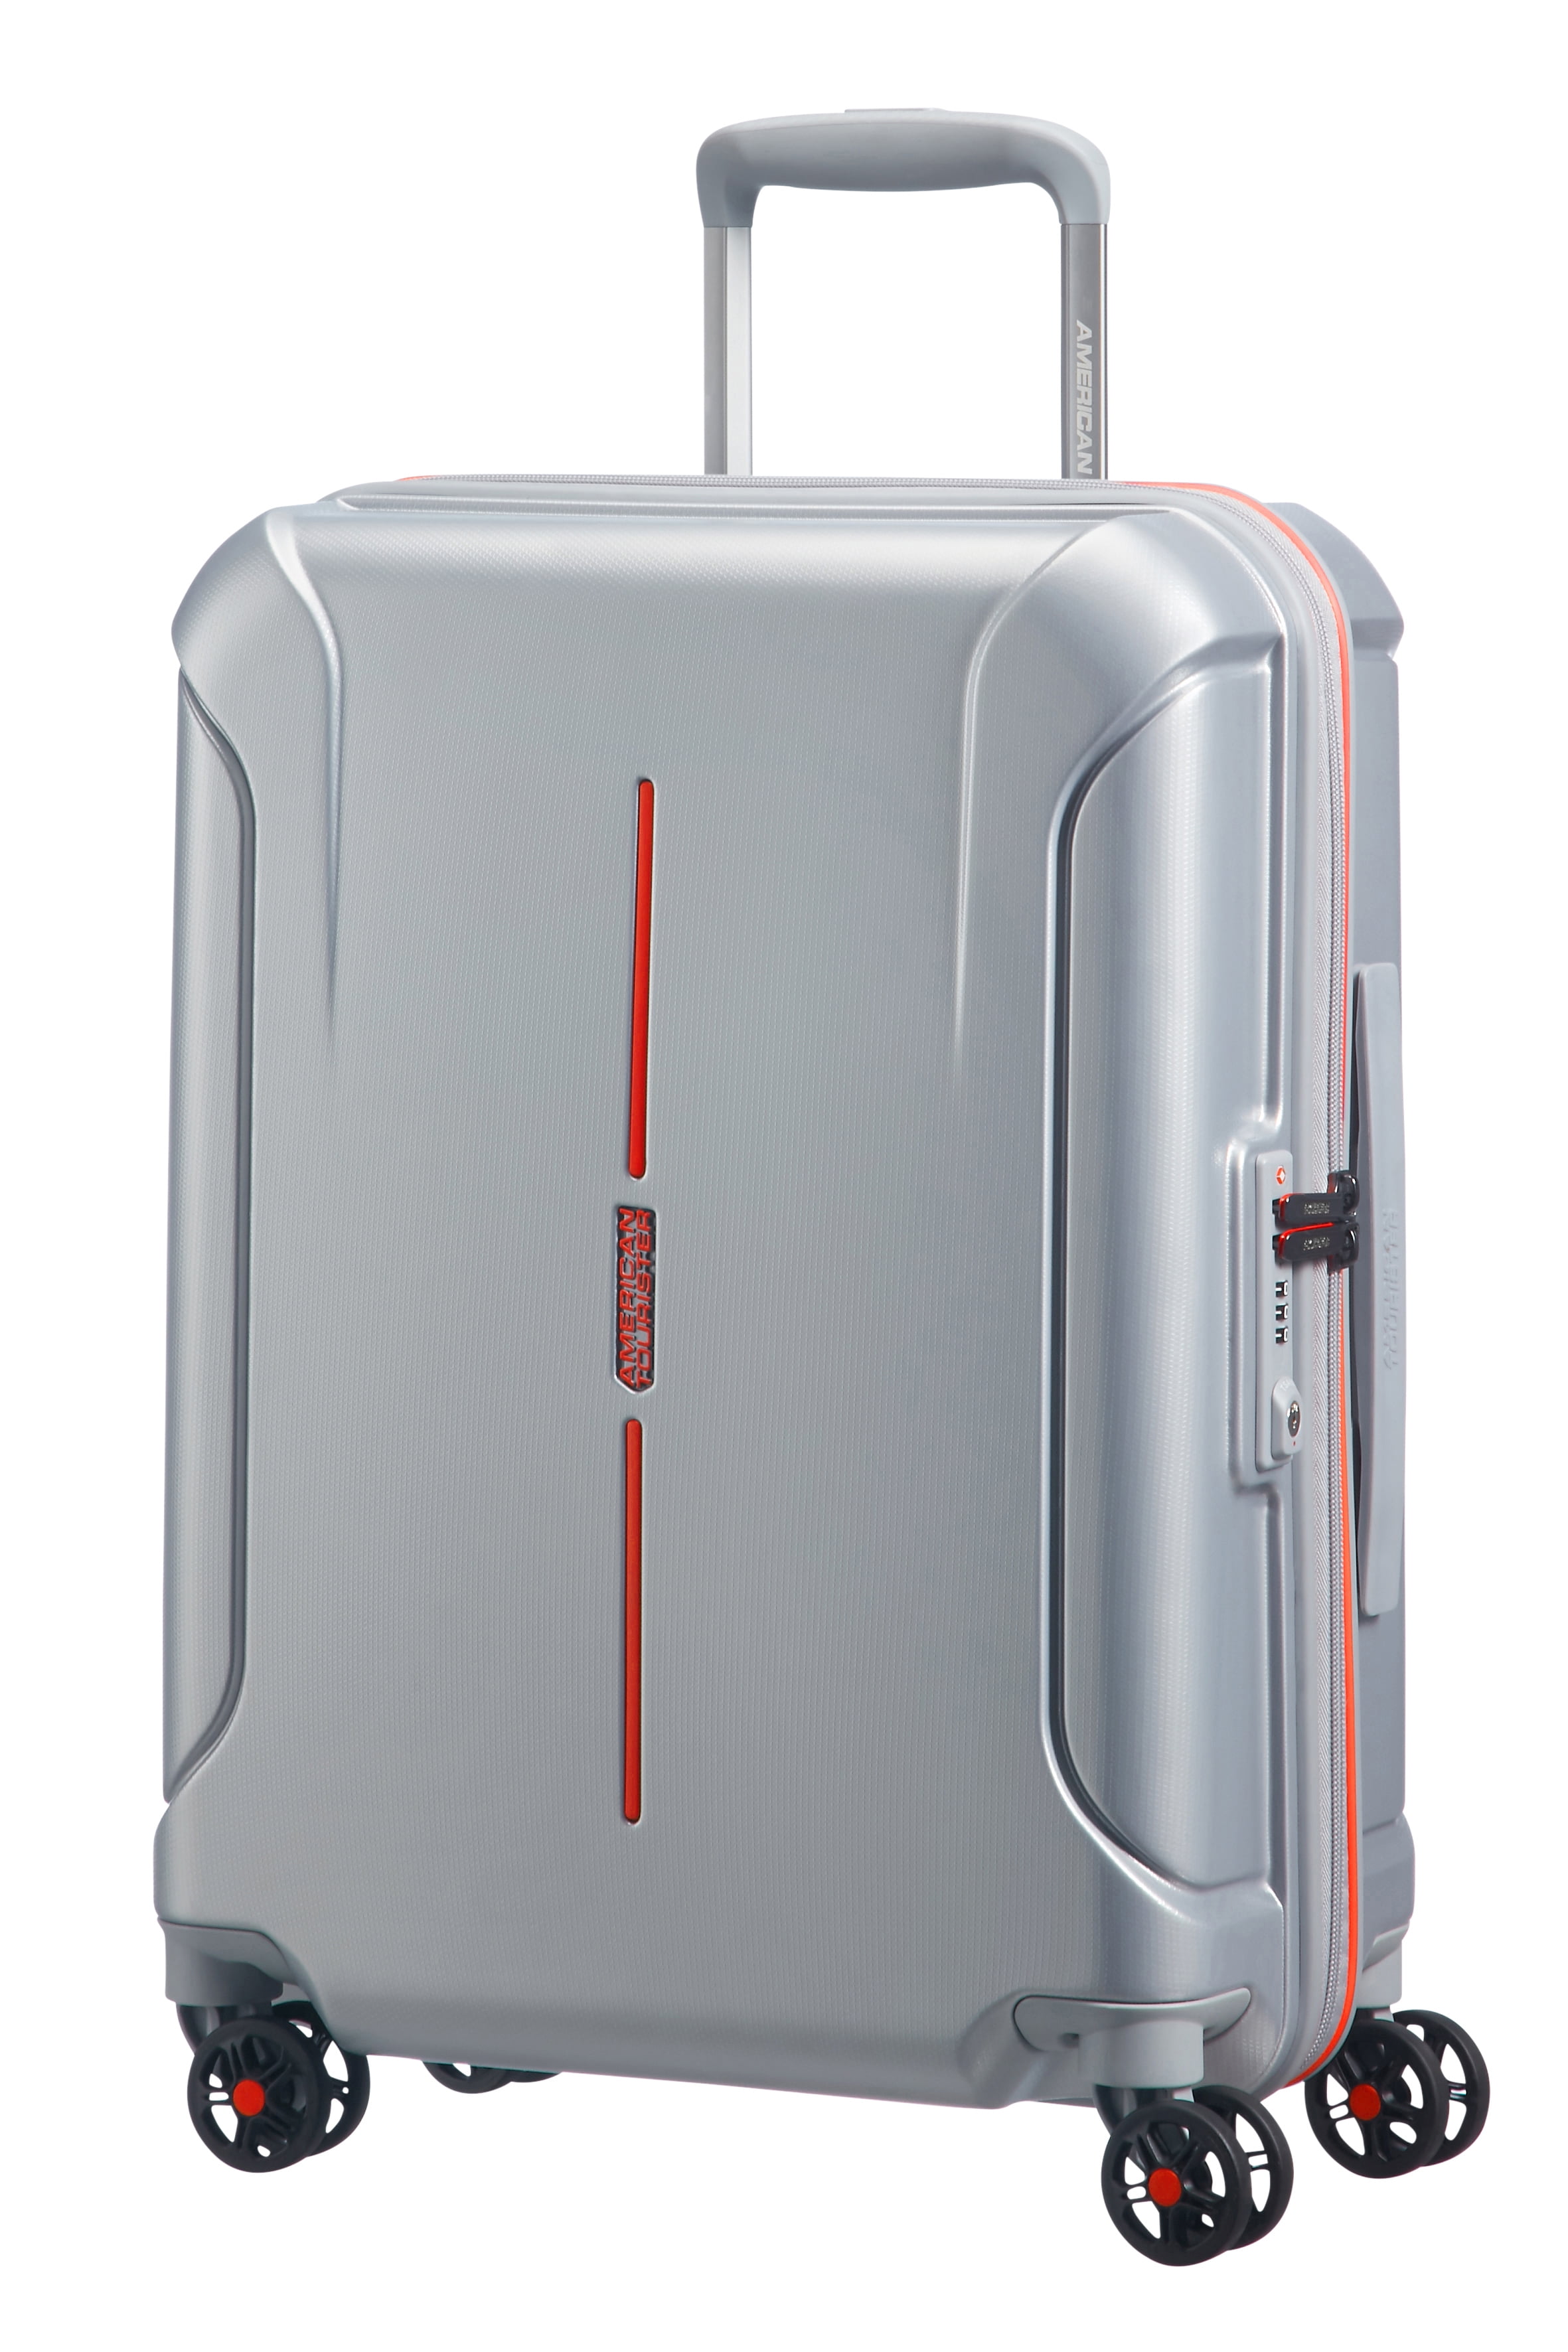 American tourister luggage review